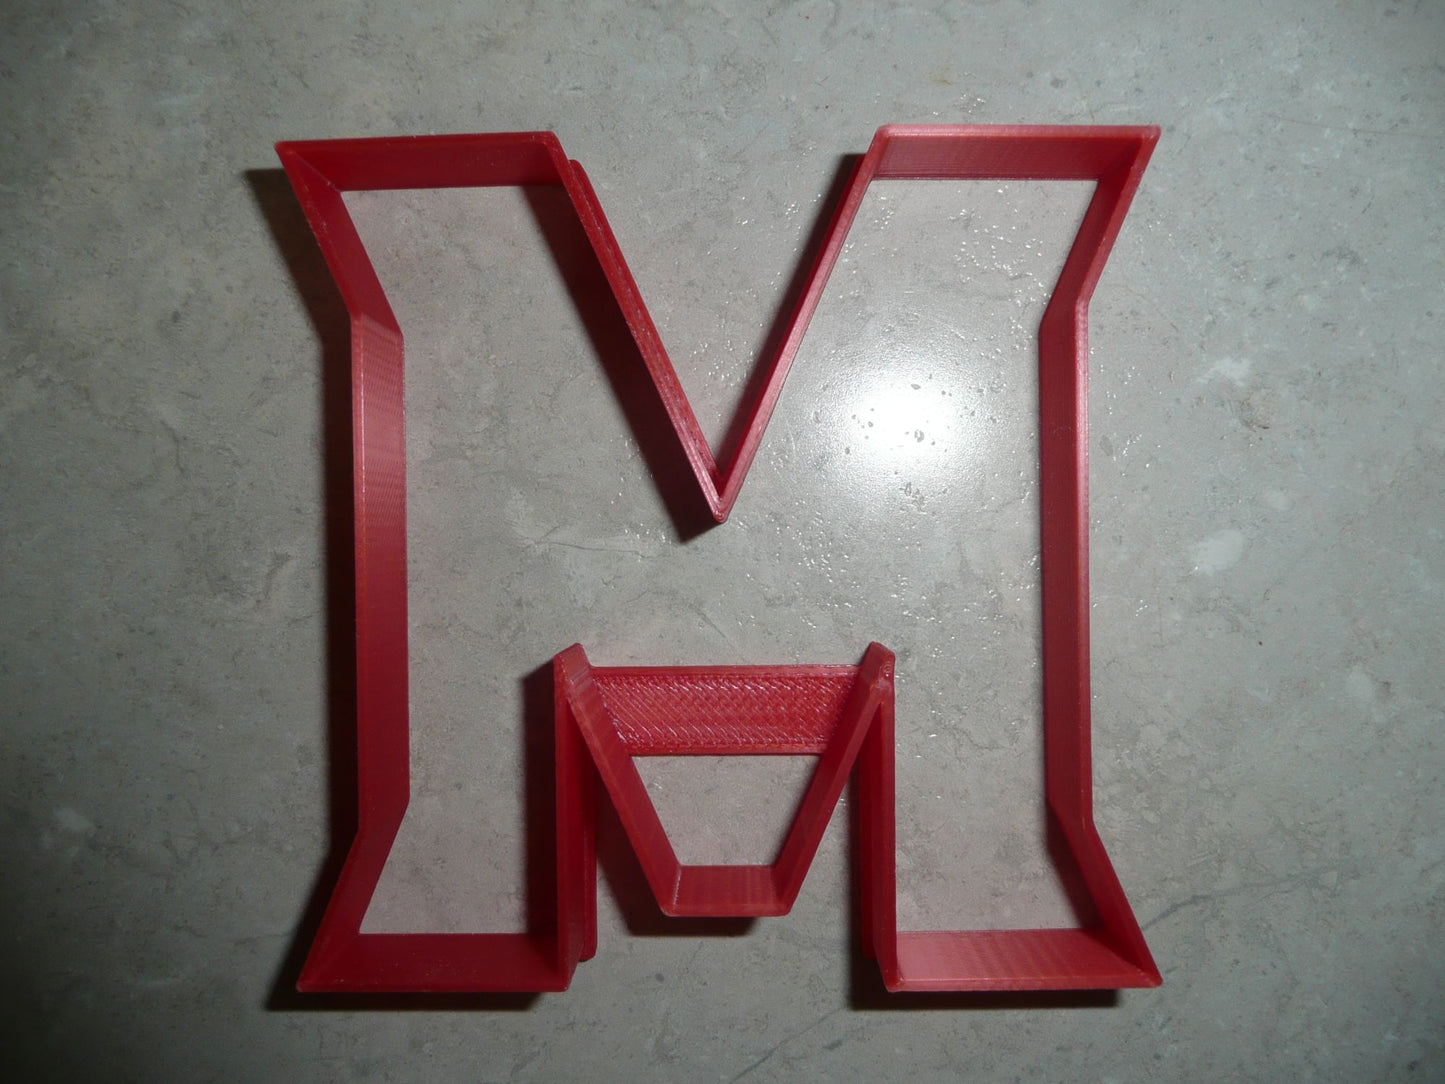 6x Univ Of Maryland Terps Terrapins M Letter Fondant Cutter 1.75 Inch USA FD2936